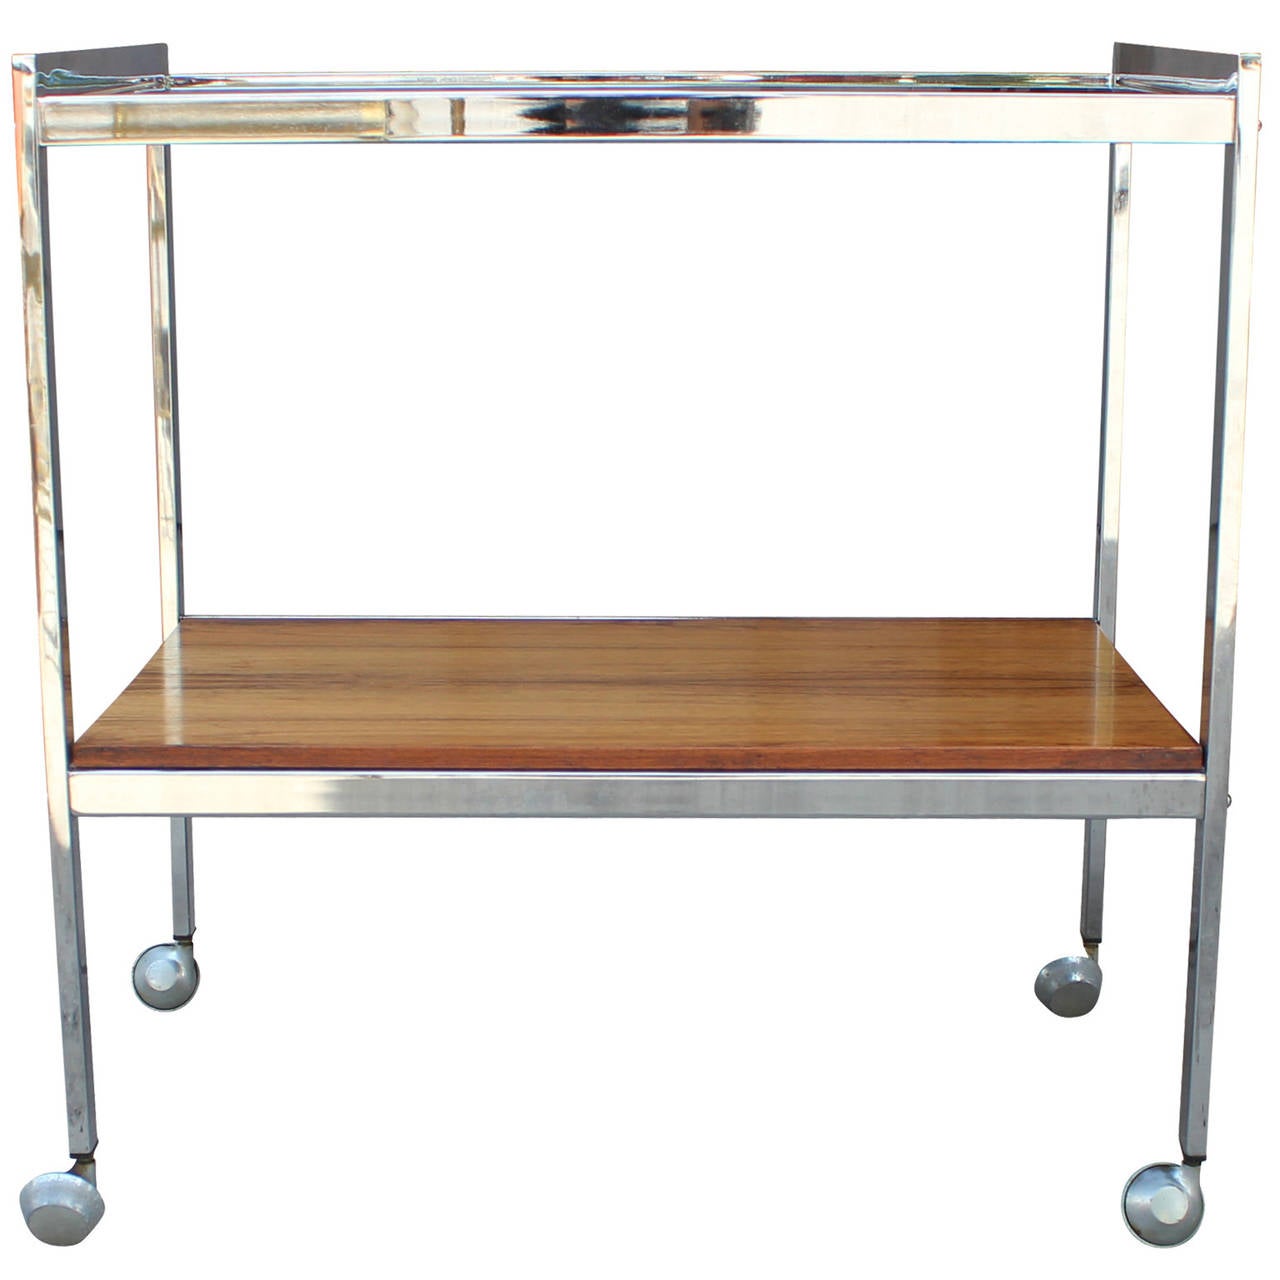 Beautiful chrome framed bar cart. Cart is adorned with smoked glass and a dramatic grained rosewood. Cart is timeless with its elegant clean lines. Great as a side table.